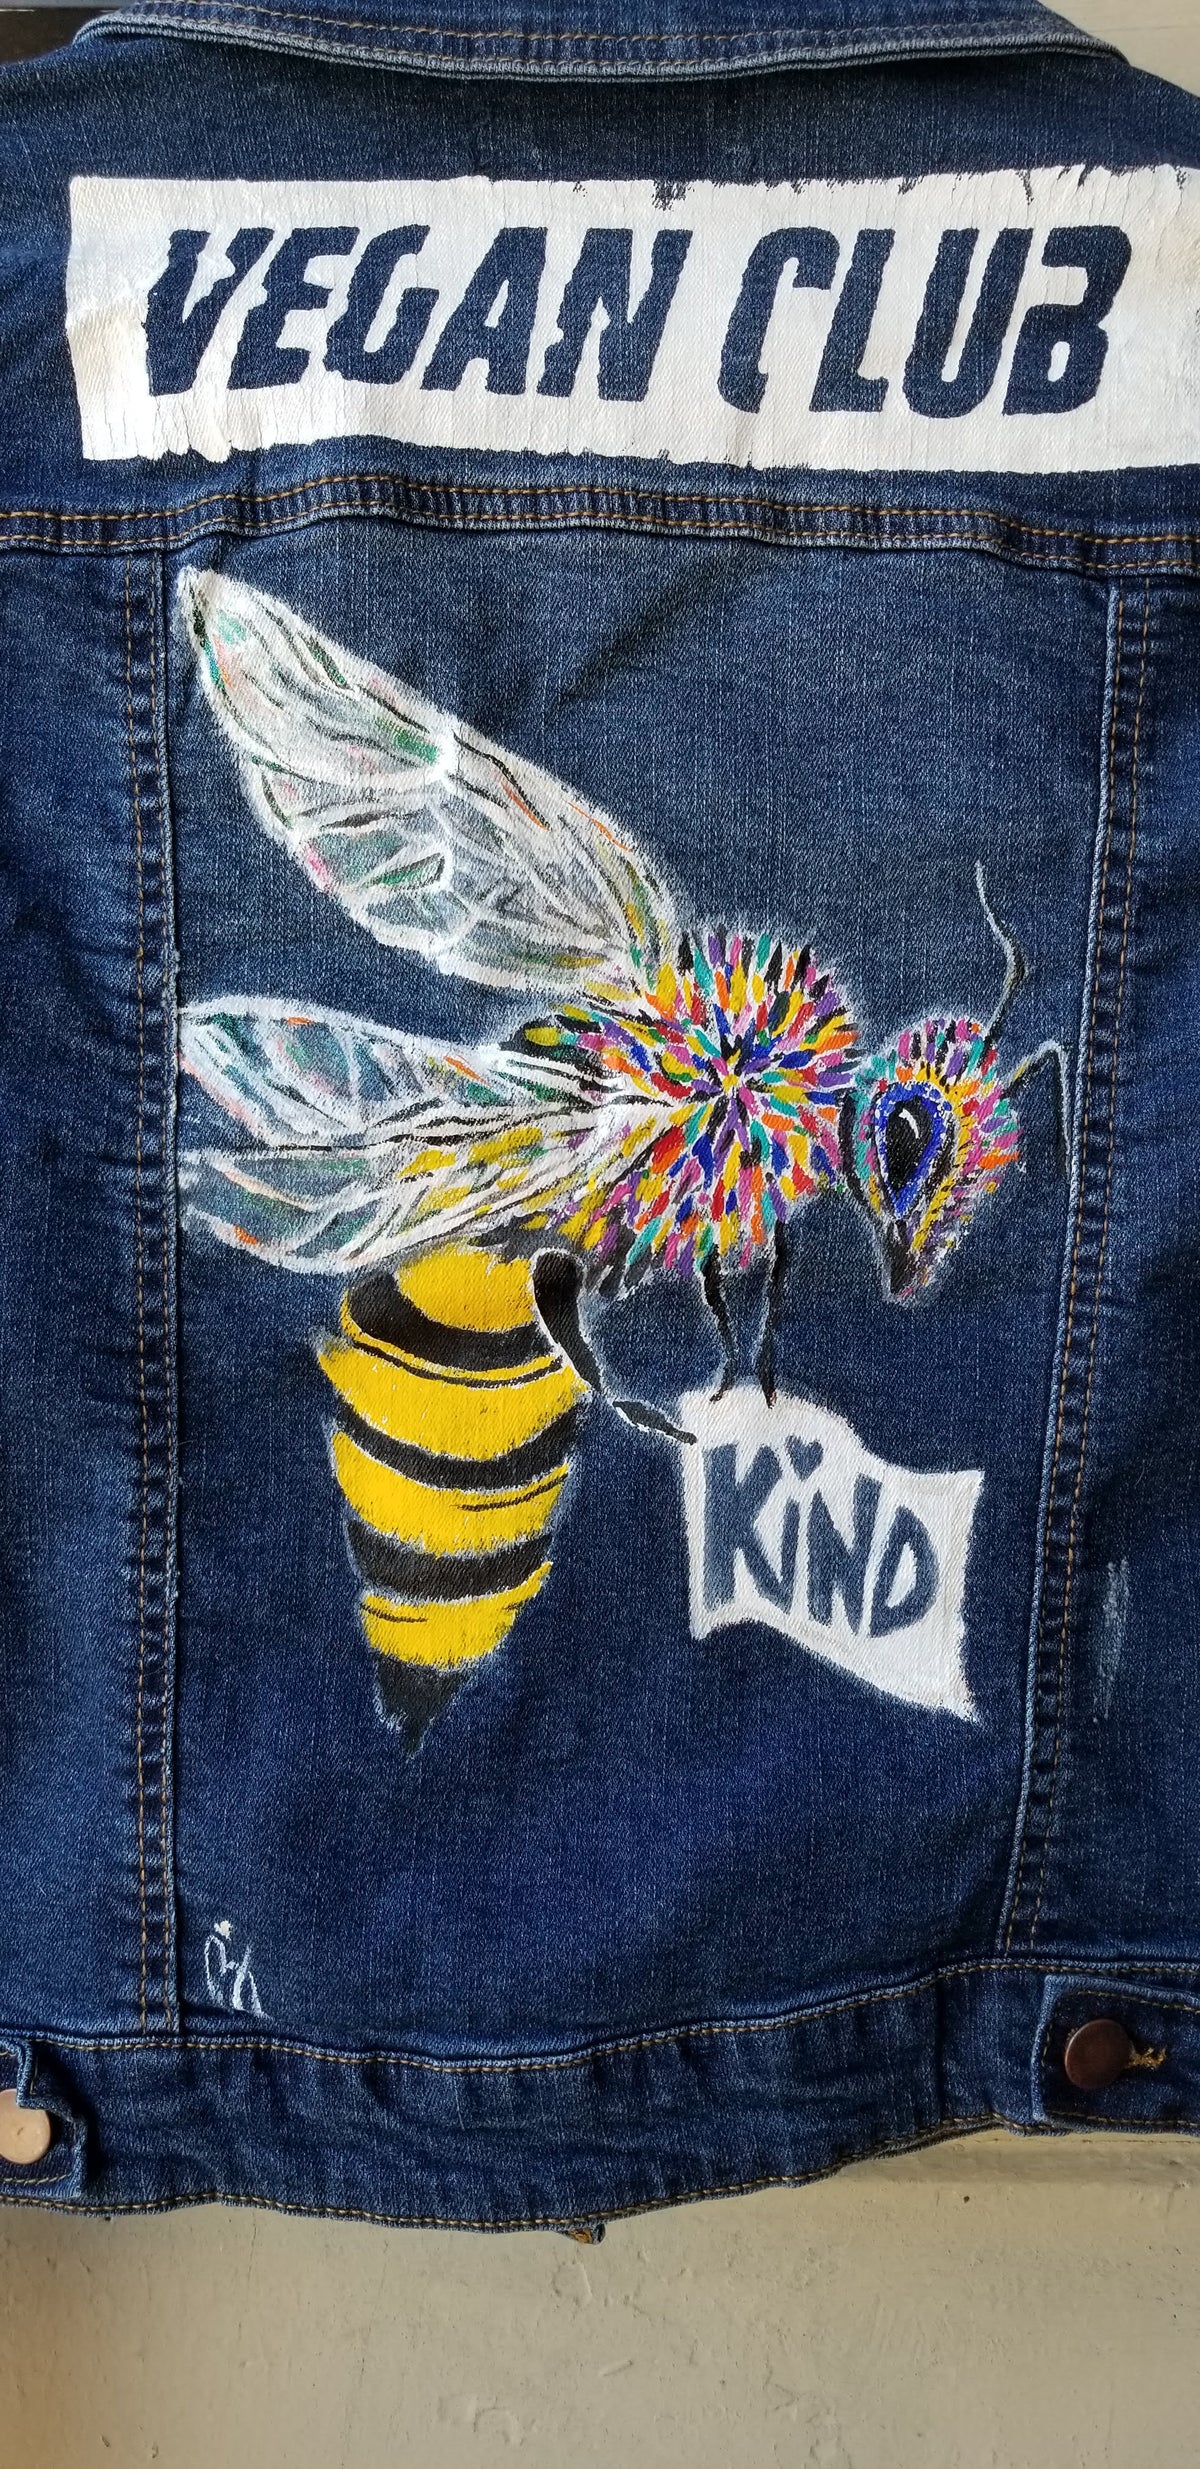 SOLD - Upcycled Jean Jacket Vest Vegan Club featuring a bee by artist Brandi Jae